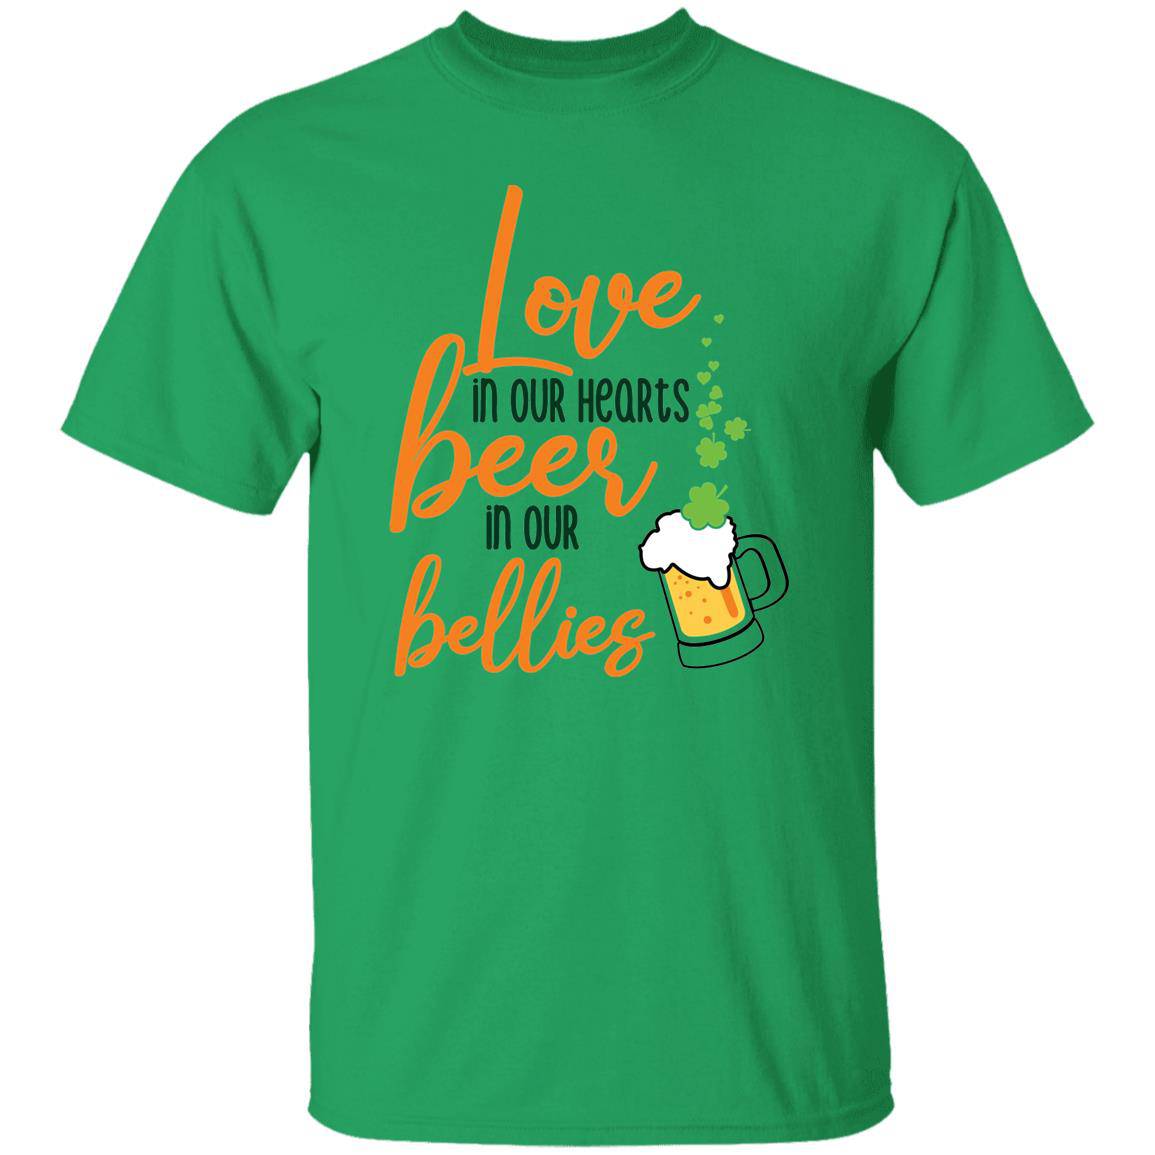 Love in Our Hearts and Beer in Our Bellies Classic T-Shirt - Expressive DeZien 